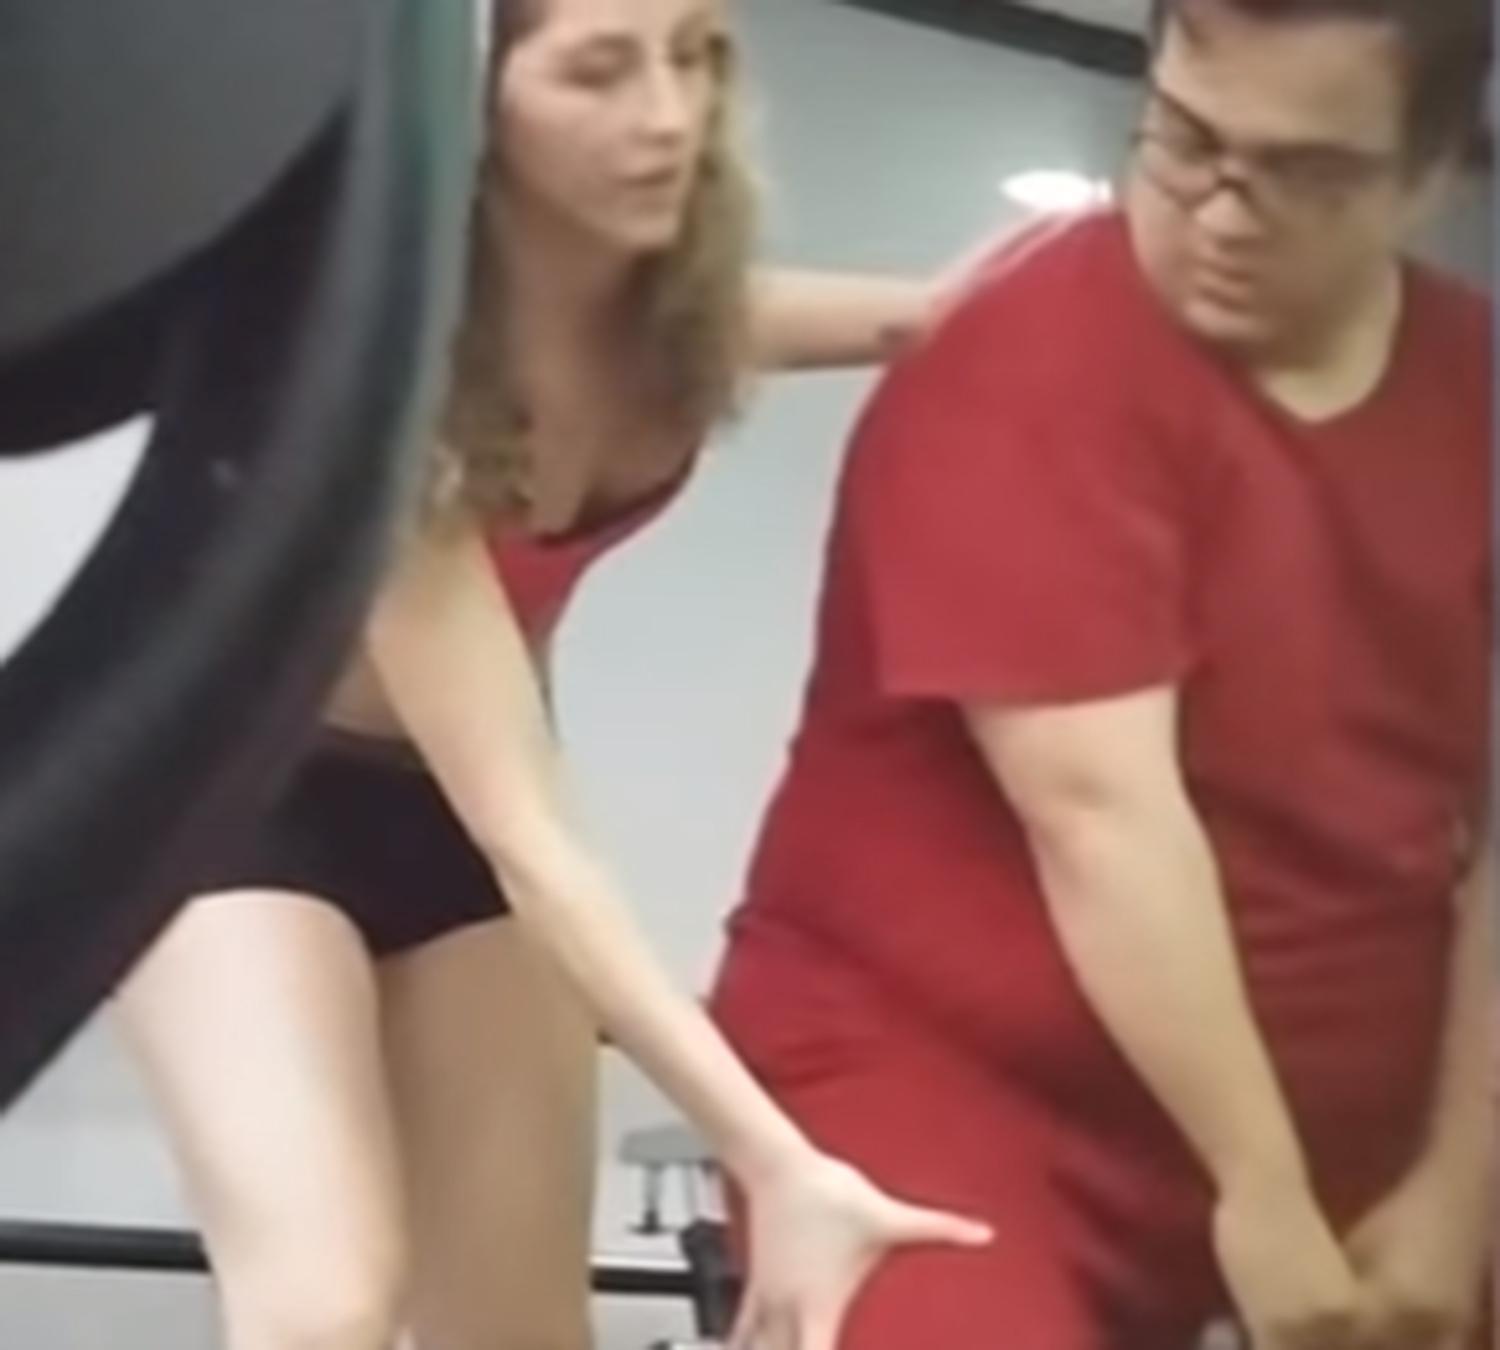 Andra Guides The Man Through His Exercises And Is Even Seen Slapping His Bum